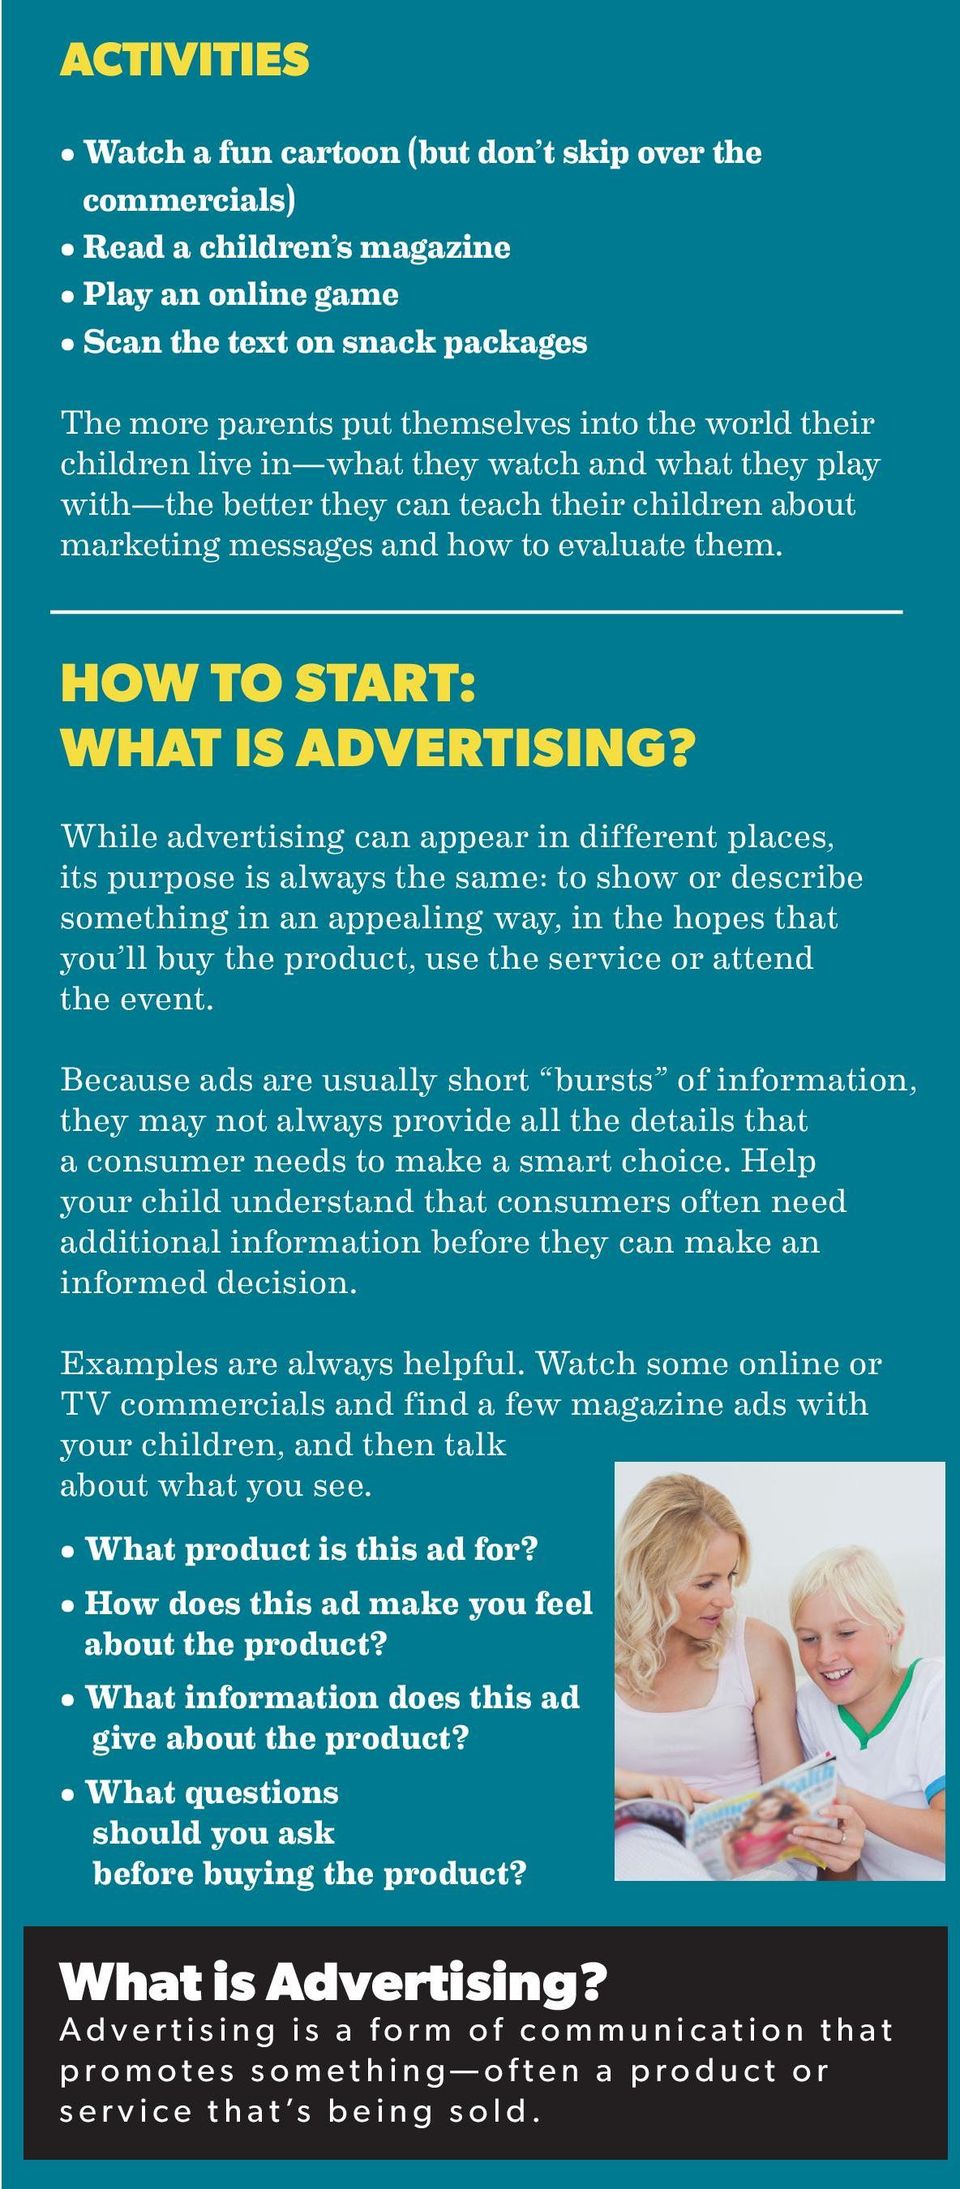 While advertising can appear in different places, its purpose is always the same: to show or describe something in an appealing way, in the hopes that you ll buy the product, use the service or